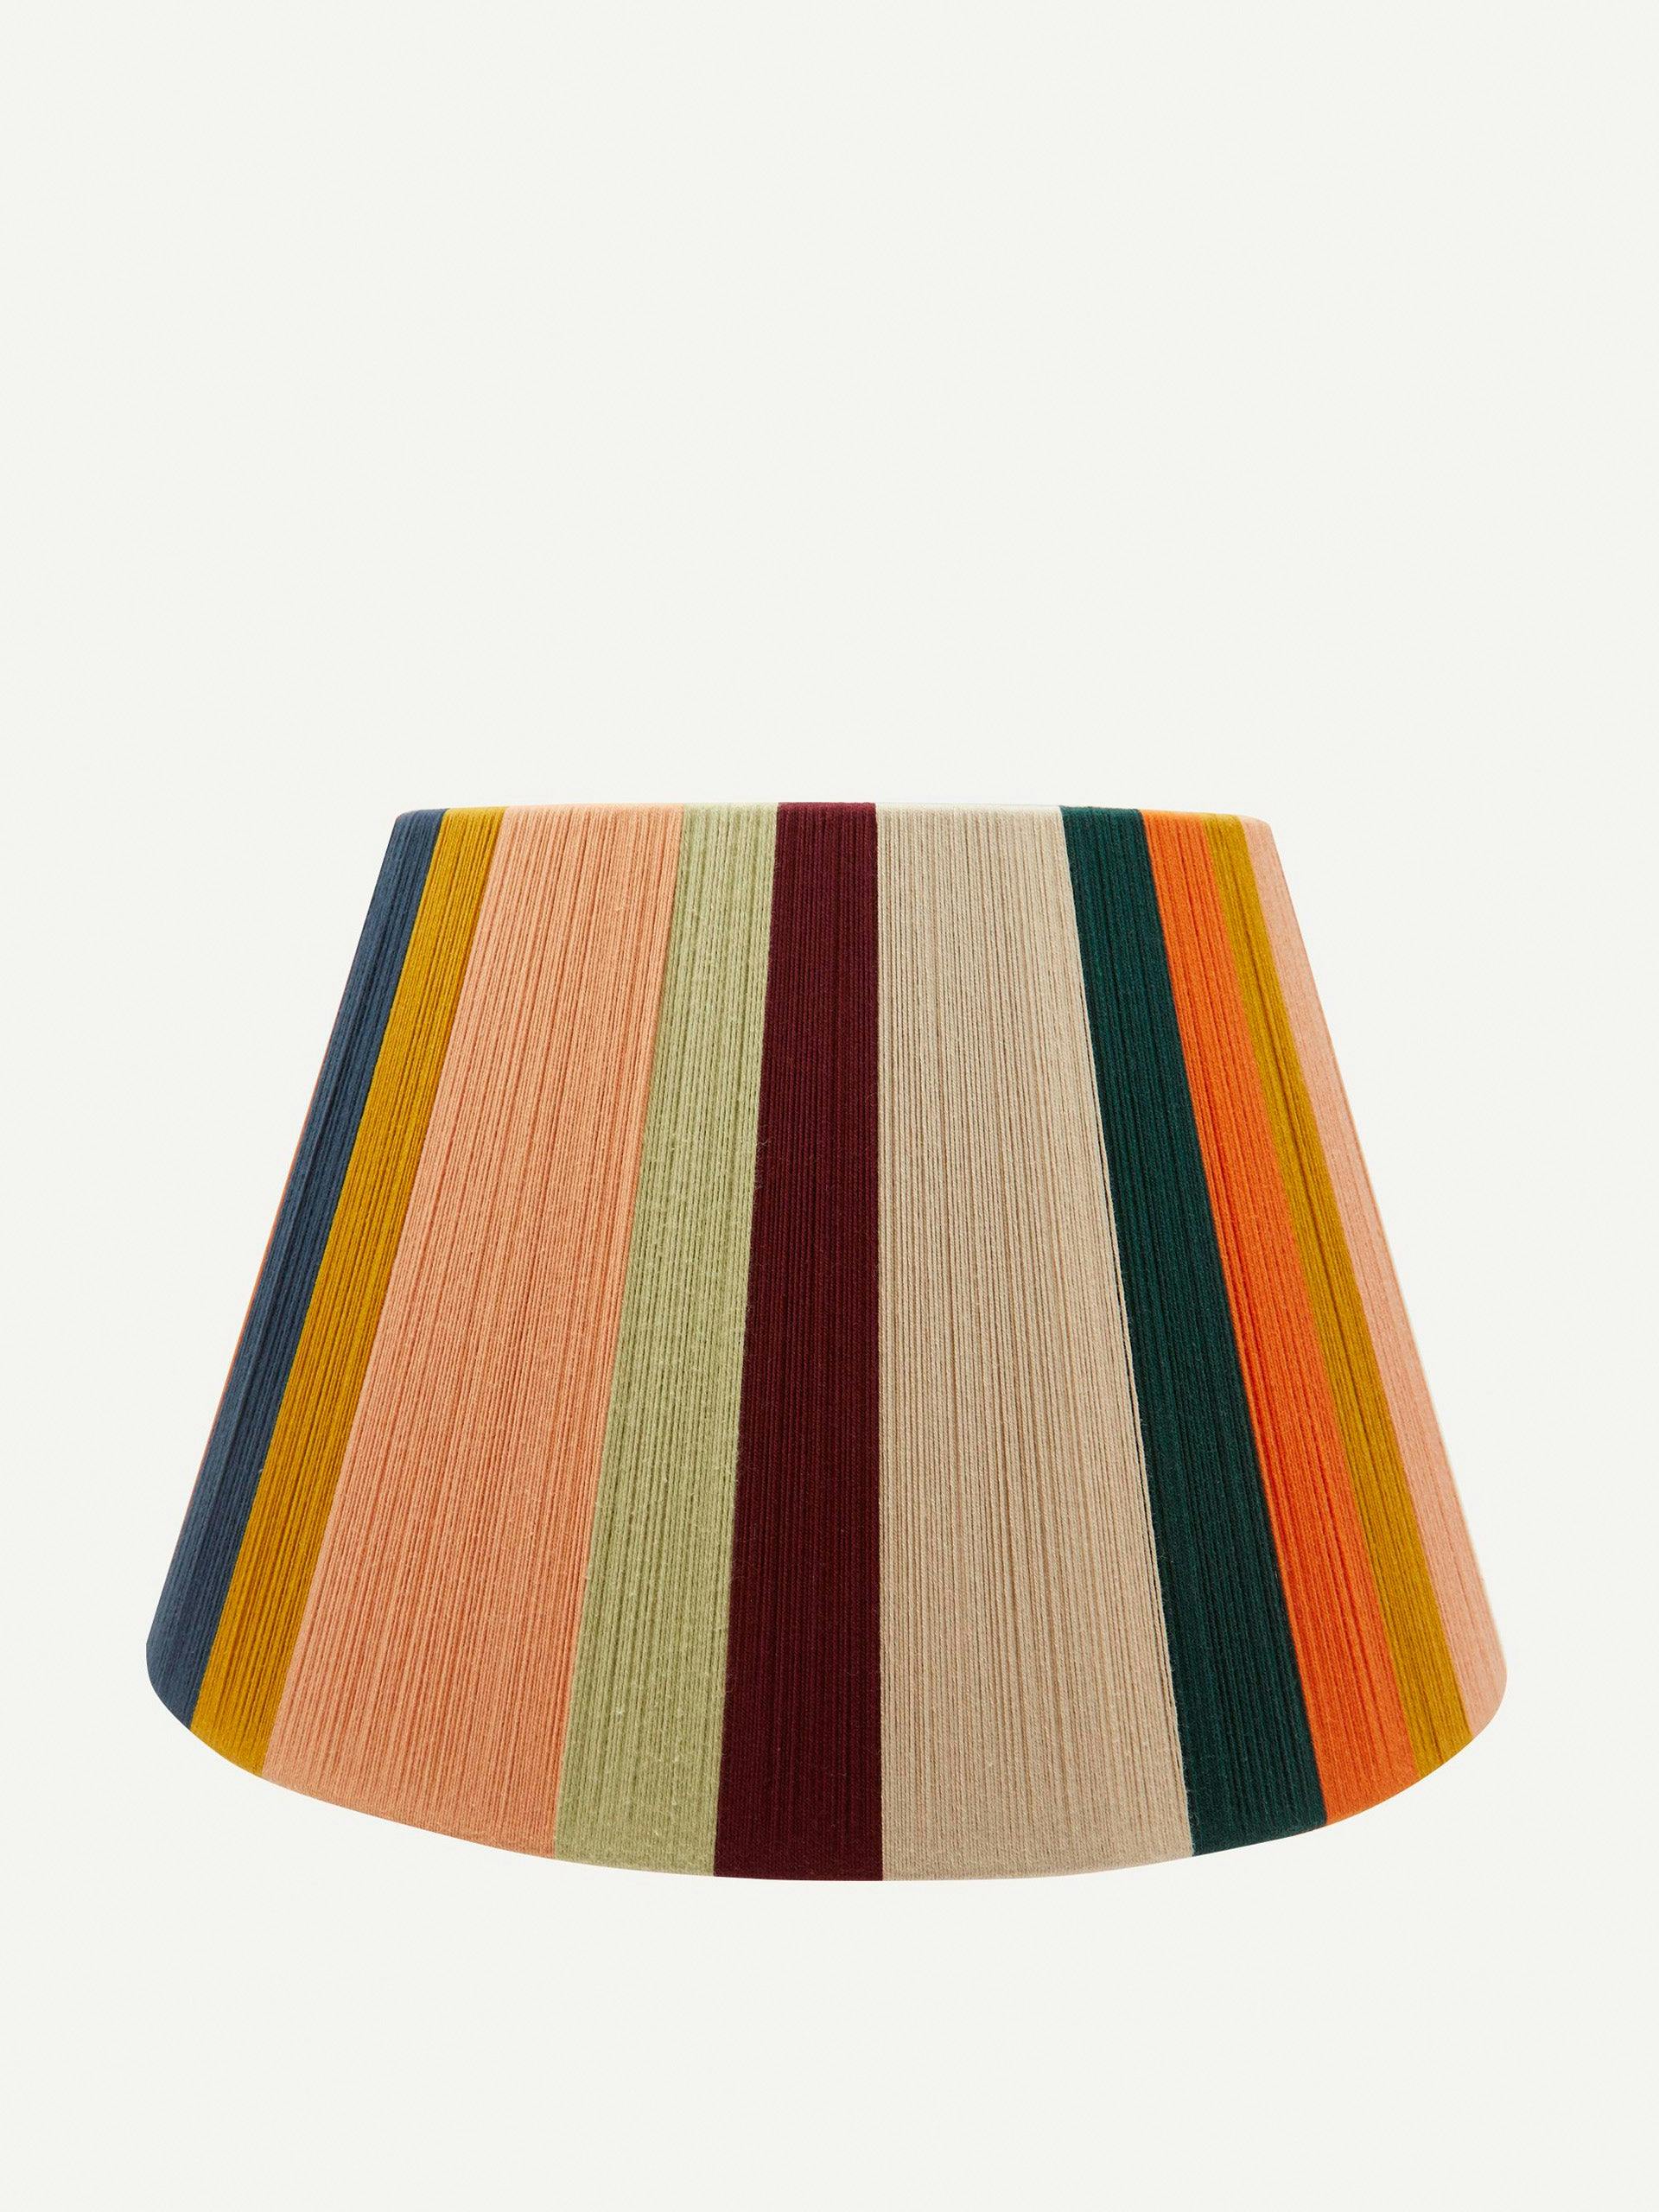 Striped lampshade